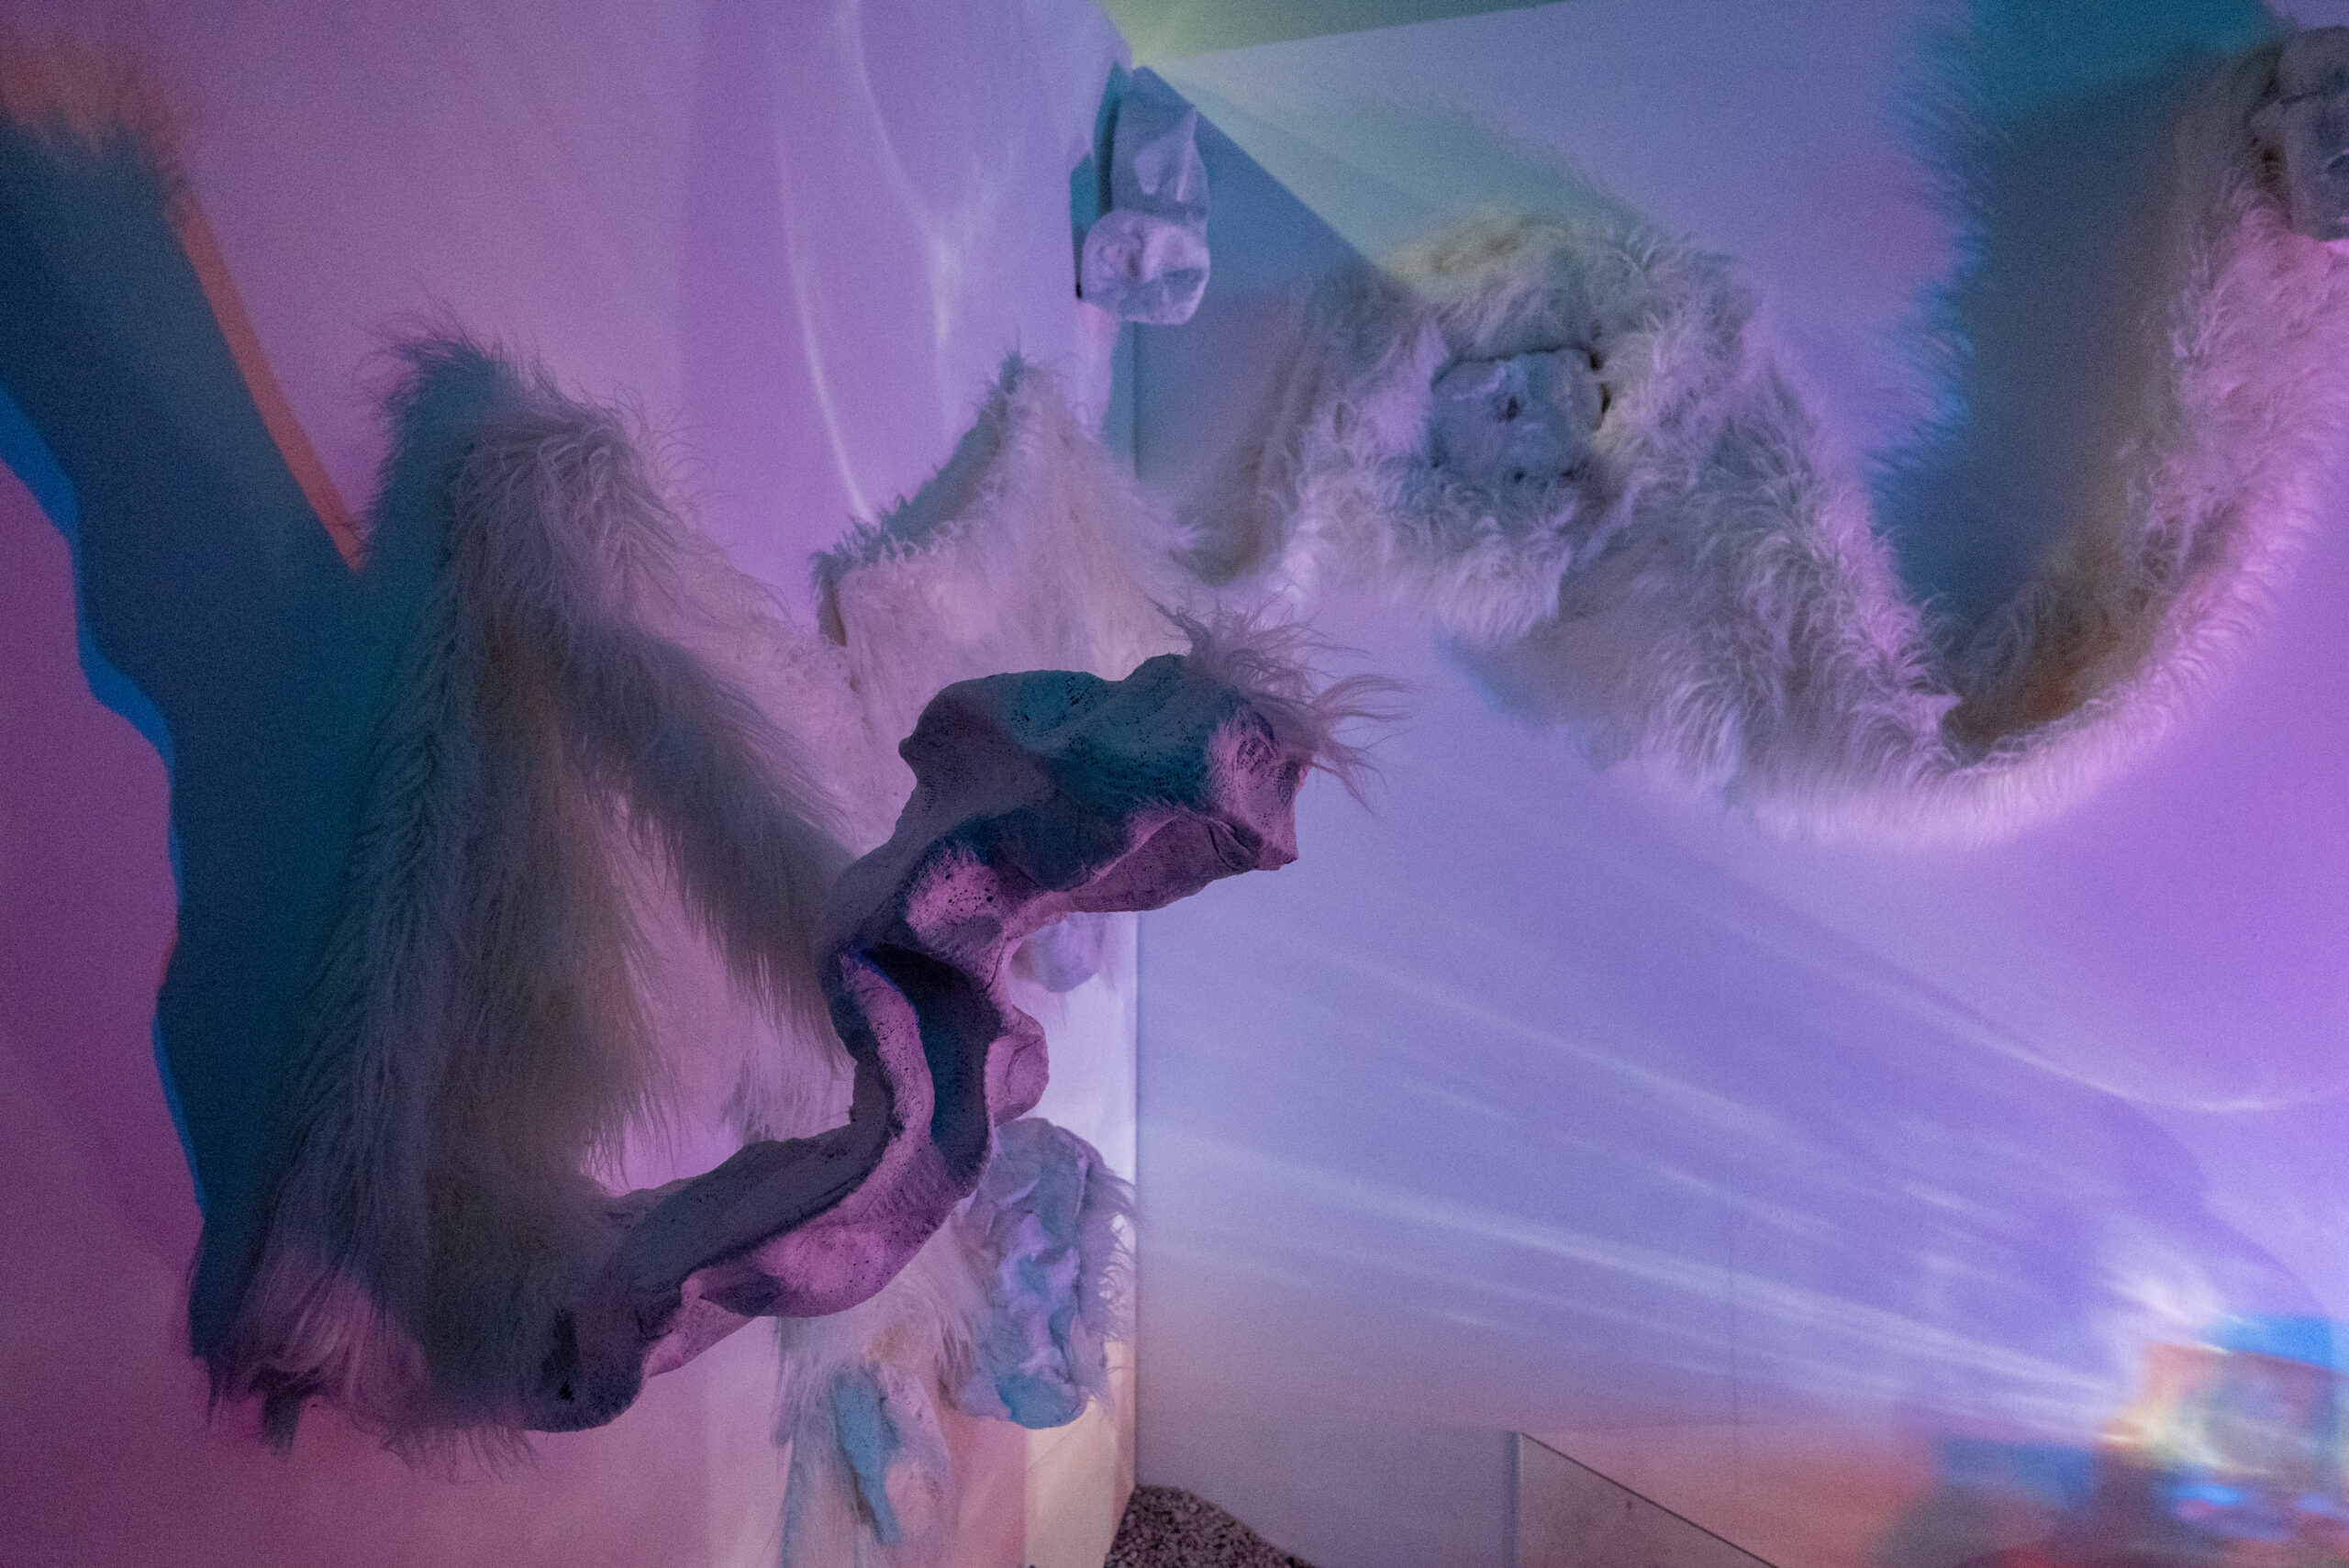 Installation in gallery corner washed in purple and pink light, with furry shapes and figures projecting off the walls